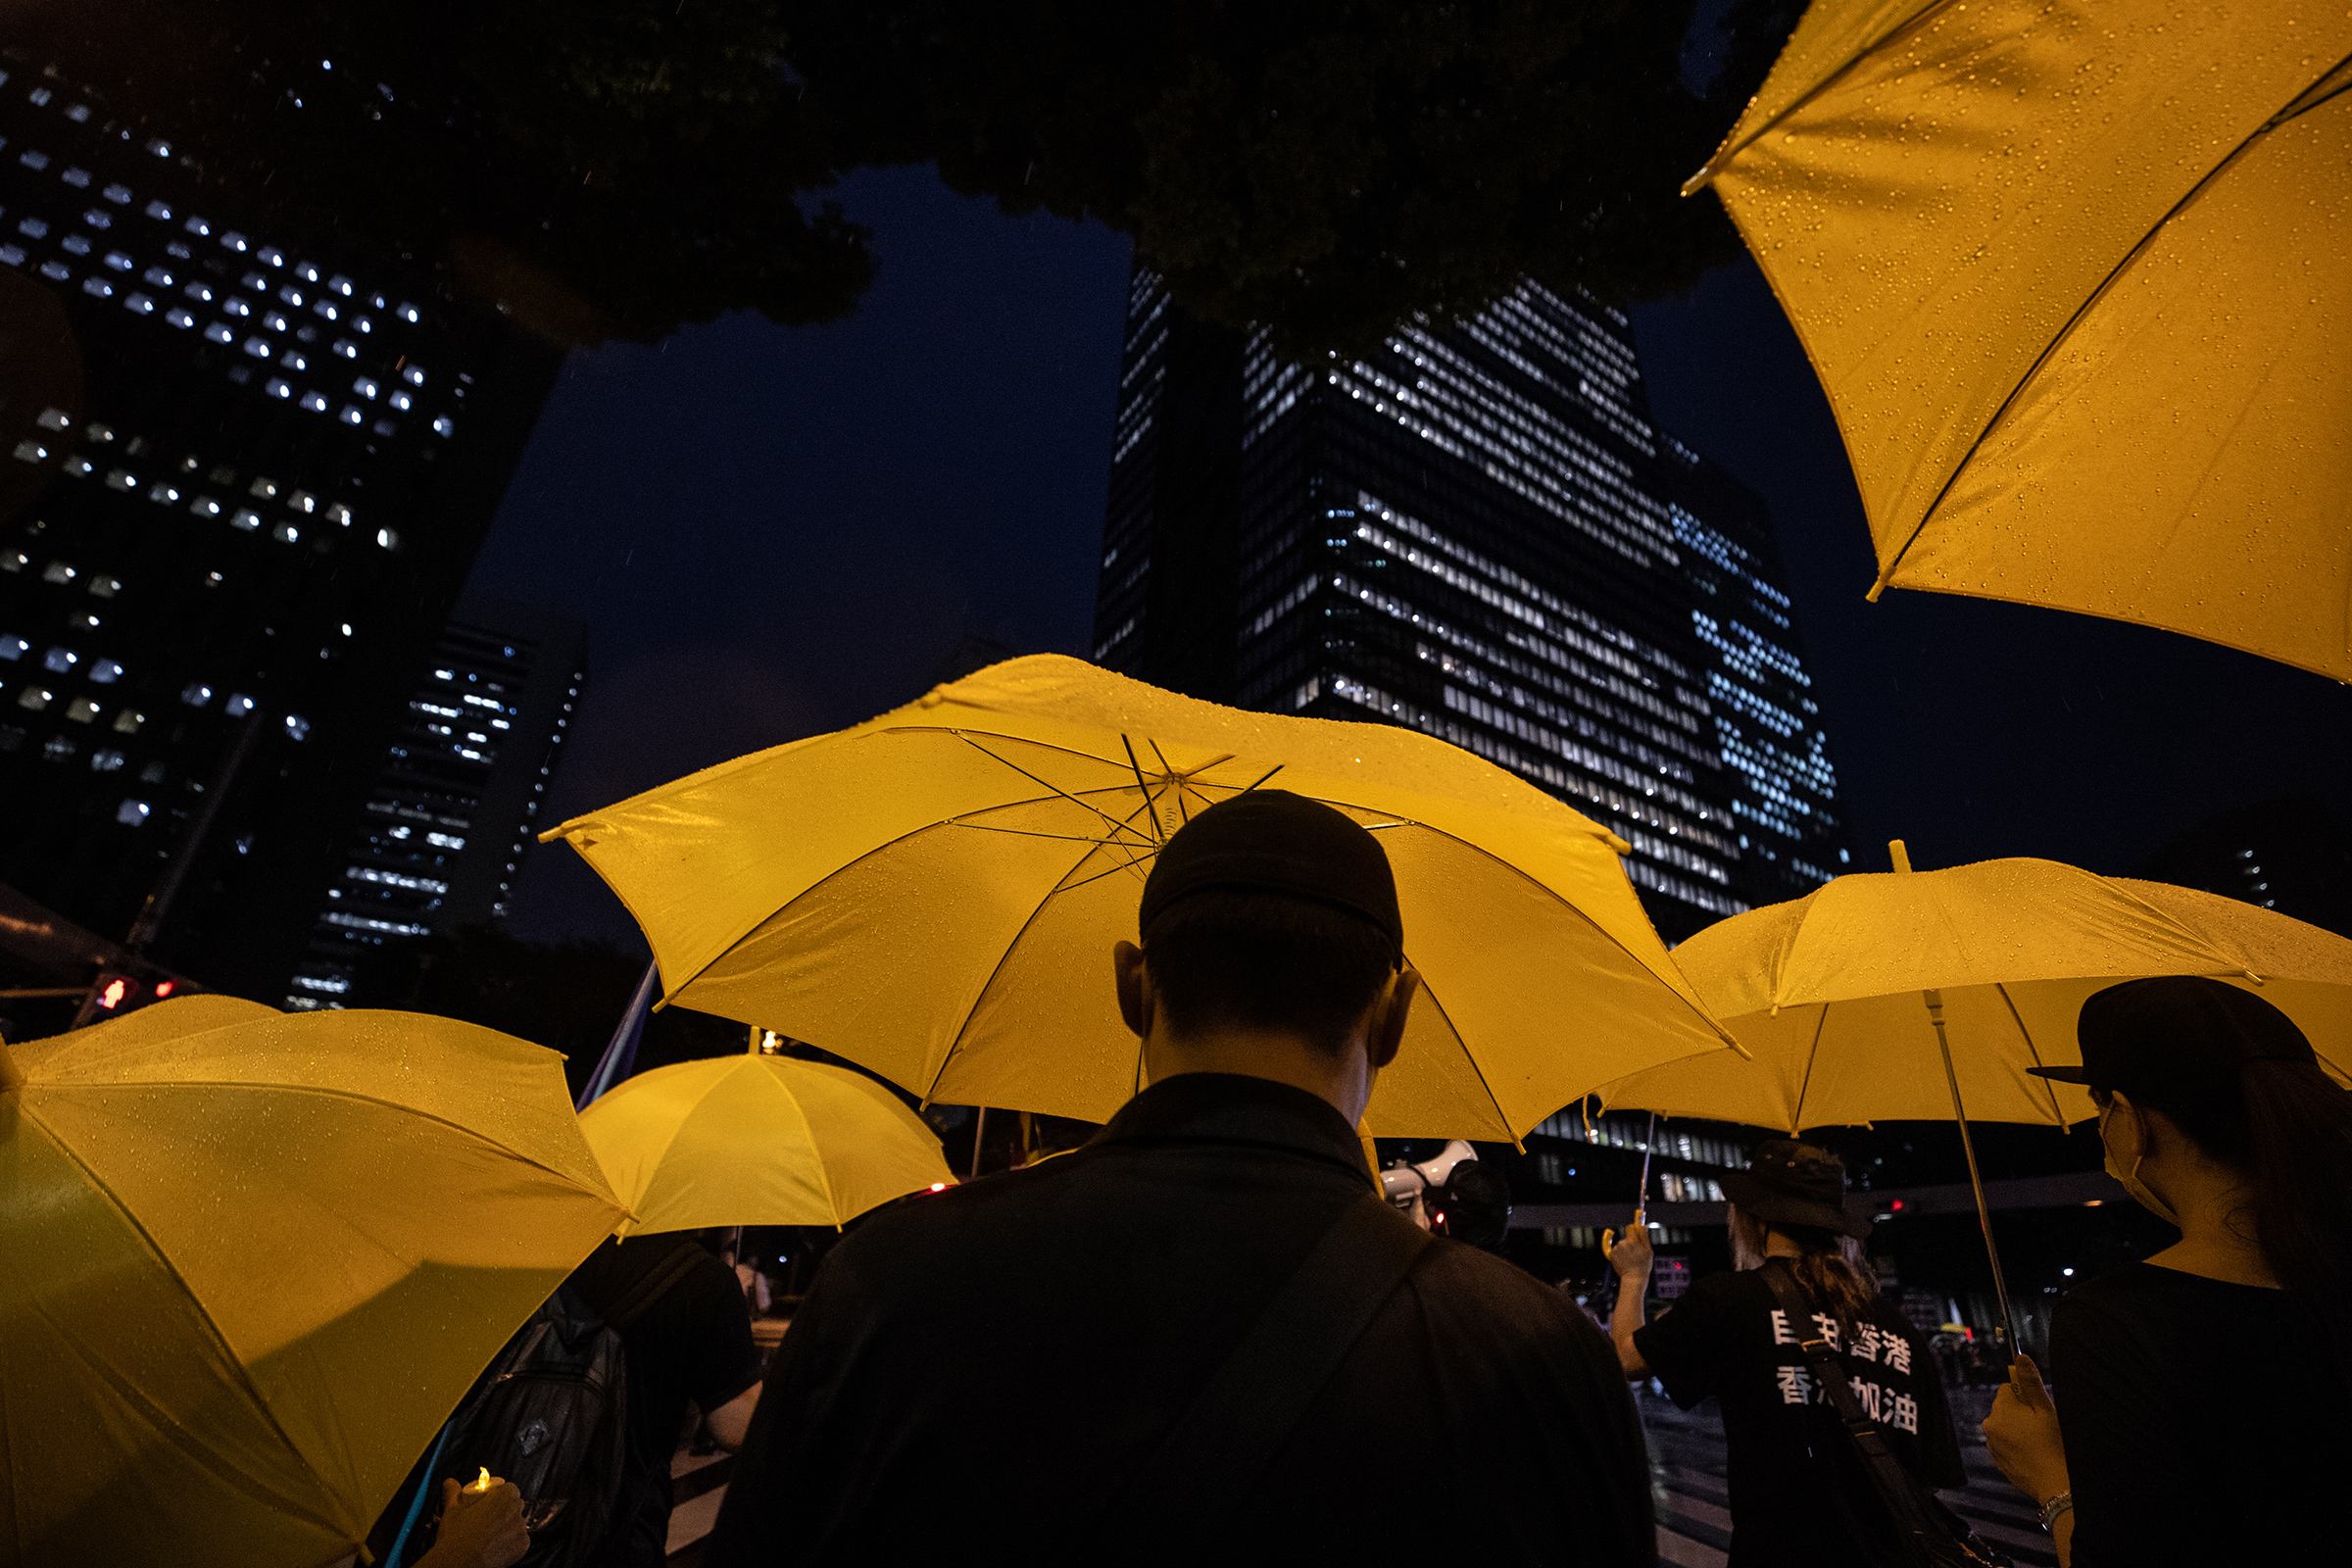 Protesters march through the Shinjuku area of Tokyo during a protest against the Chinese Communist Party on July 1, the 100th anniversary of its founding. (Takashi Aoyama—Getty Images)